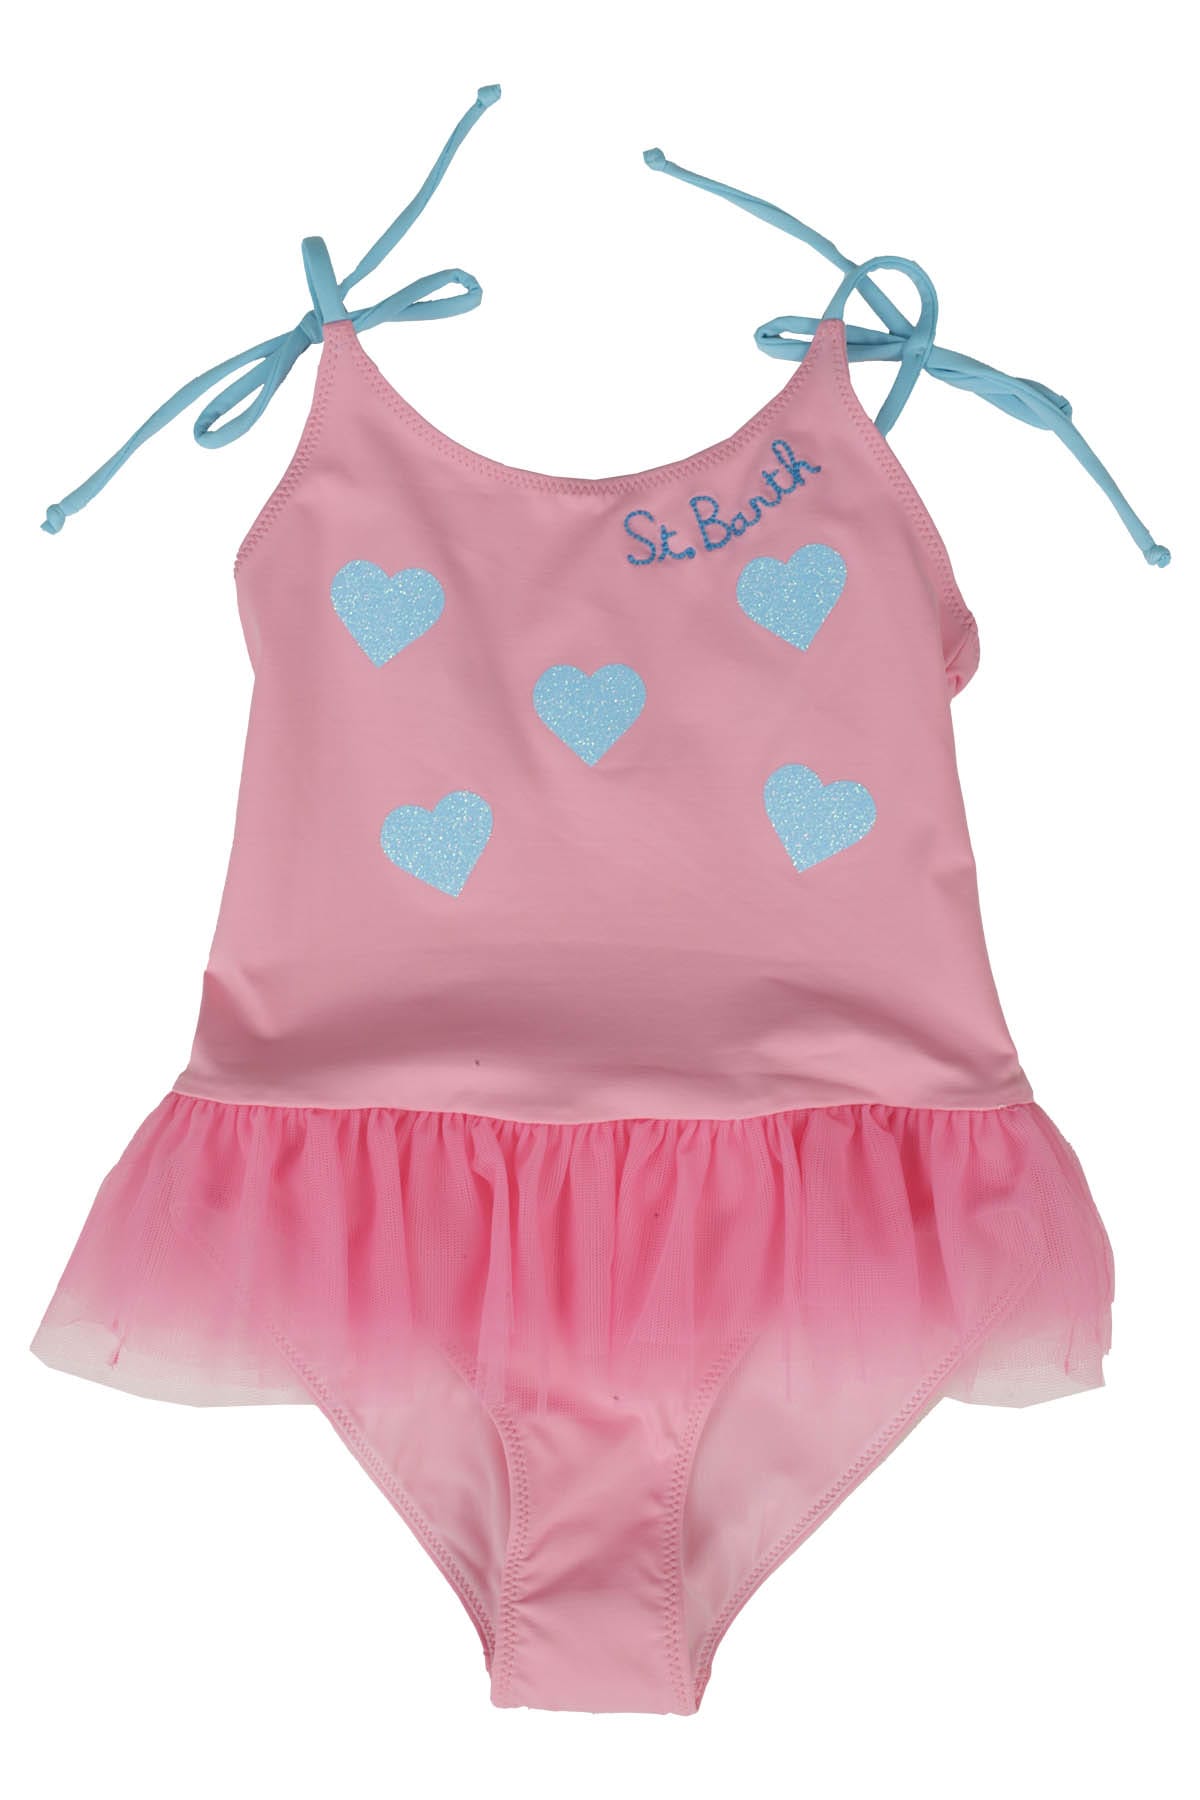 Mc2 Saint Barth Kids' One Piece With Skirt In Tulle Glitter Heart